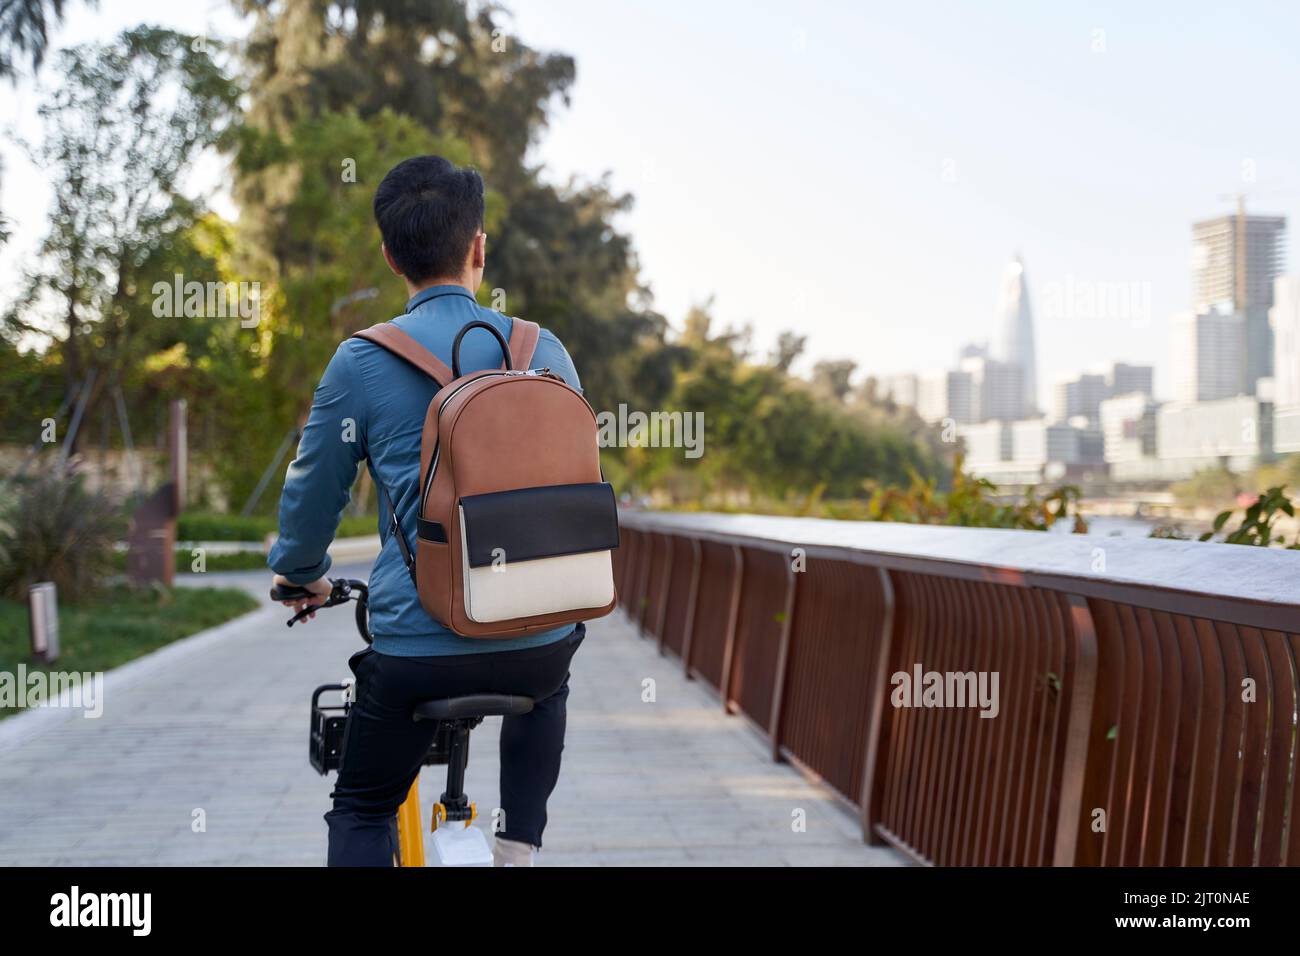 rear view of an asian young adult man riding bike in city park Stock Photo